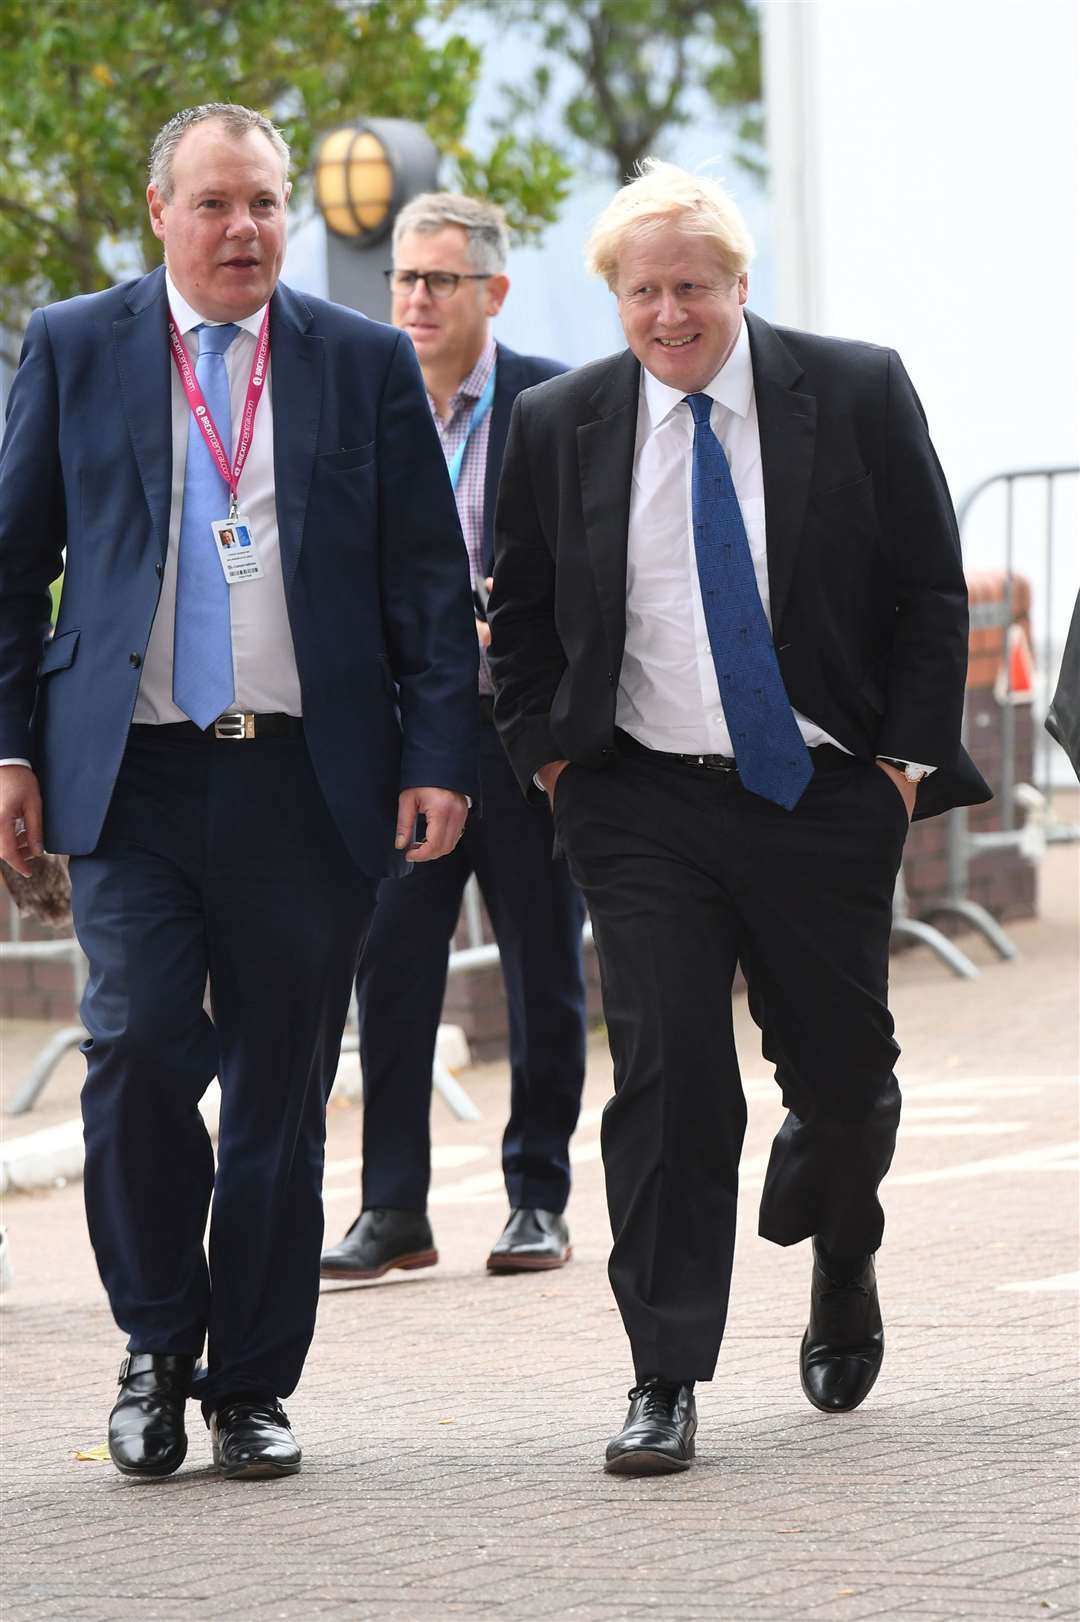 Boris Johnson (right) with Conor Burns (Stefan Rousseau/PA) Wire